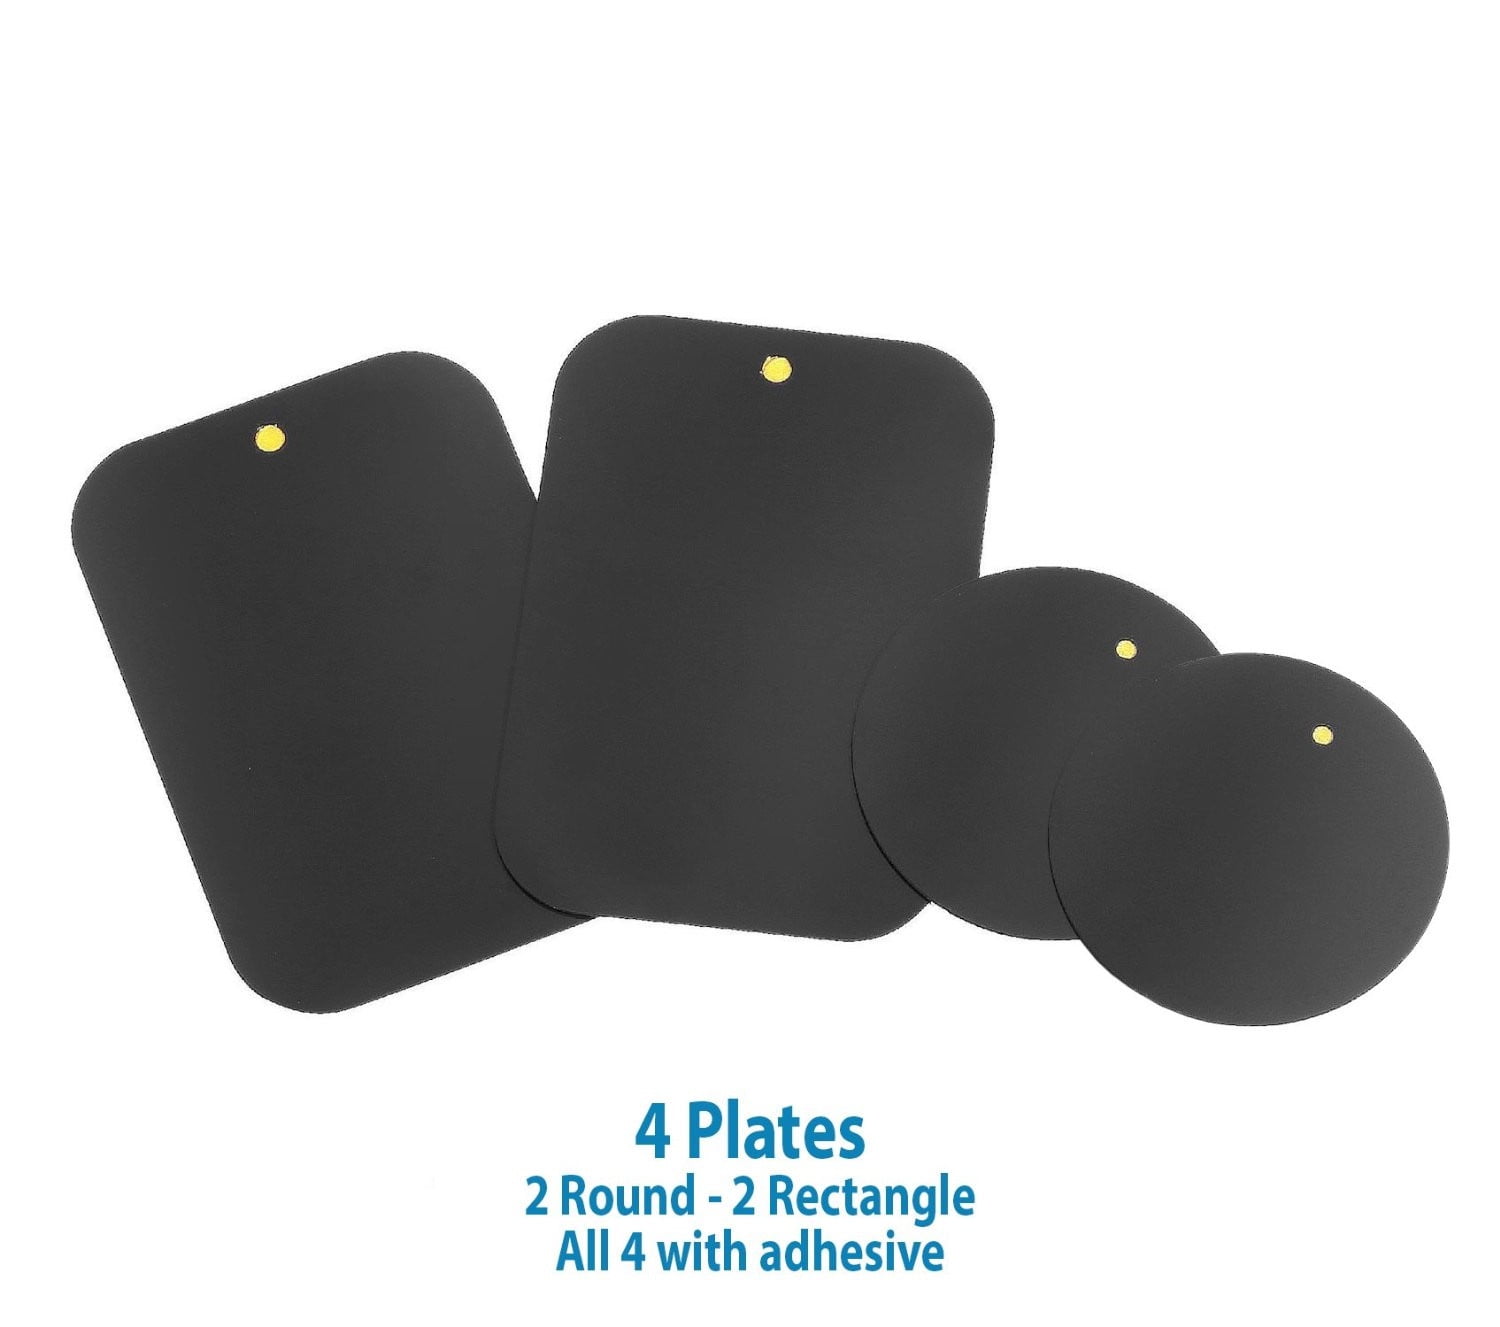 Mount Metal Plate (4 Pack) with Adhesive for Magnetic Cradle-less Mount -X4  Pack 2 Rectangle and 2 Round (Compatible with Magnetic Mounts)